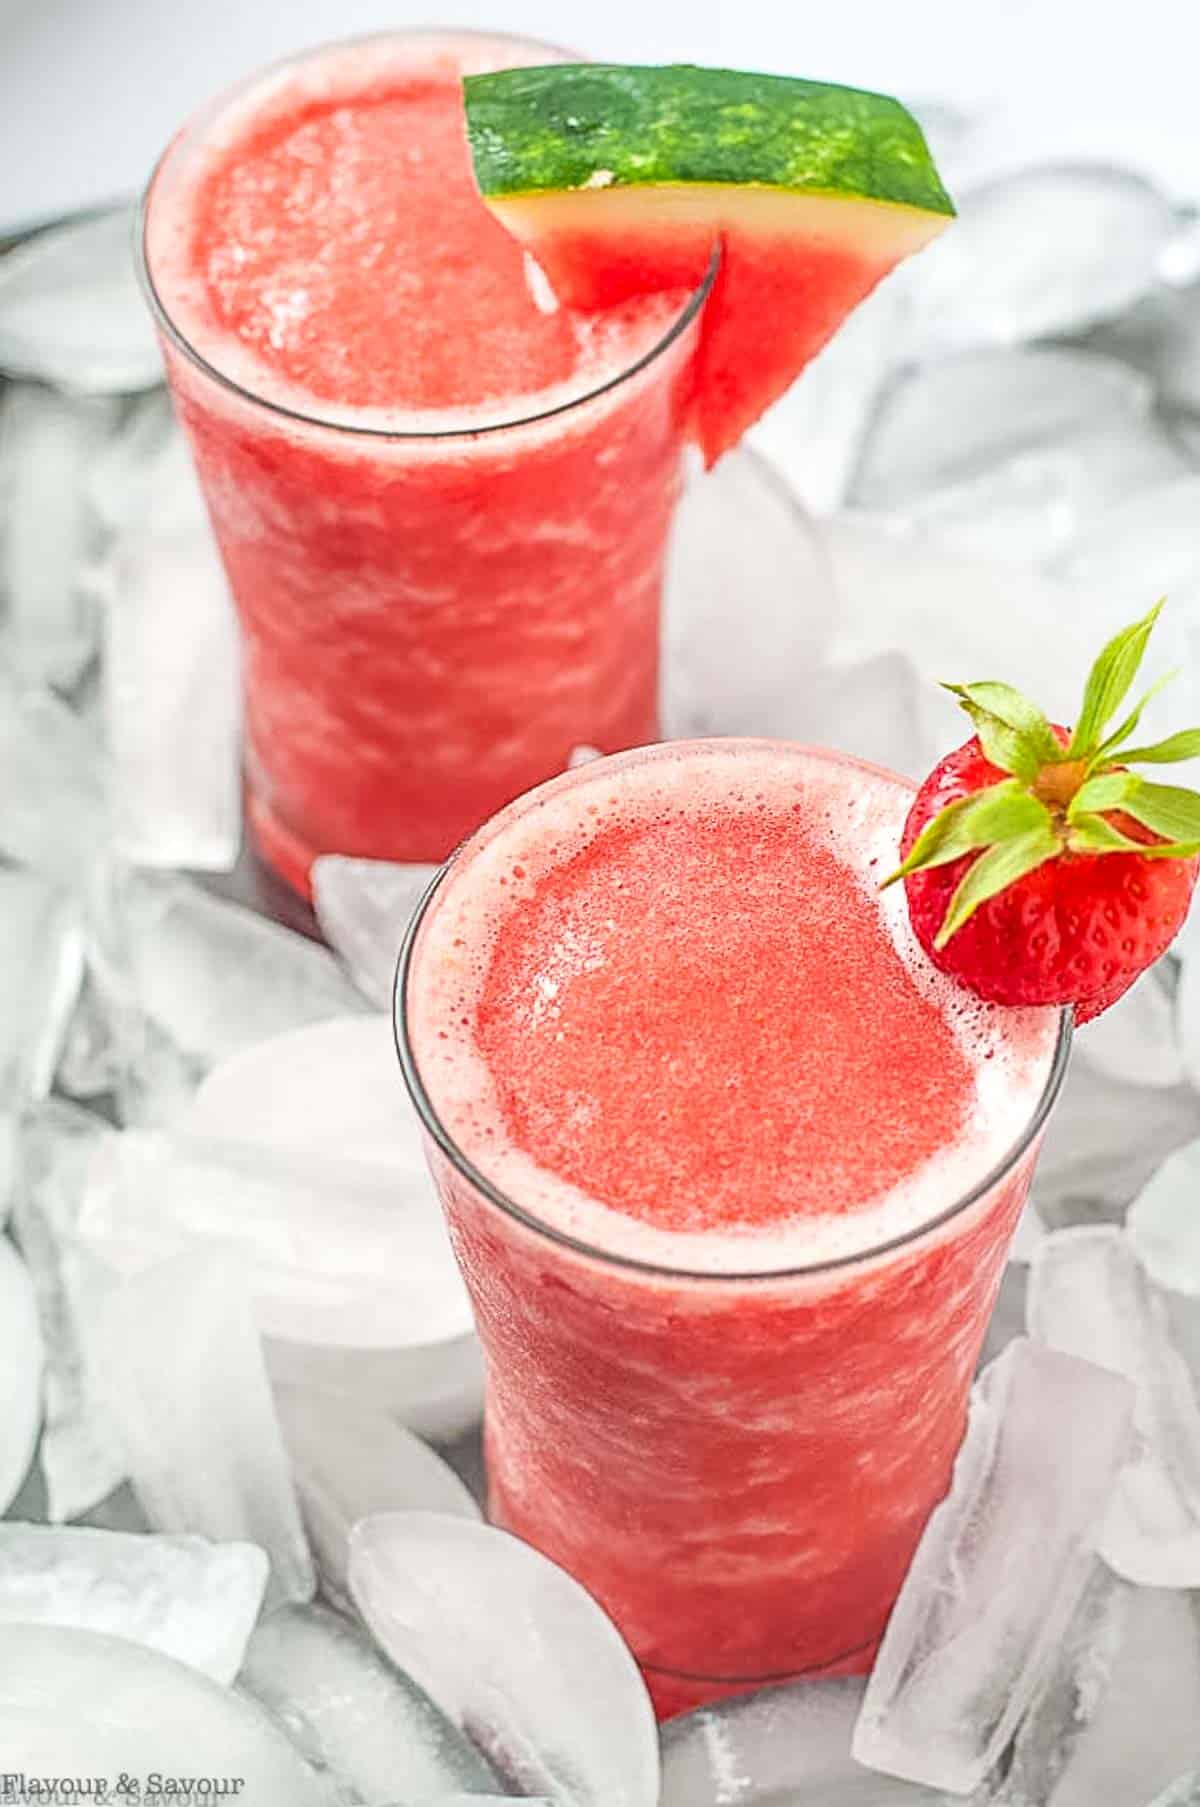 Two glasses of Strawberry Watermelon Sangria Slushie on a bed of ice cubes.